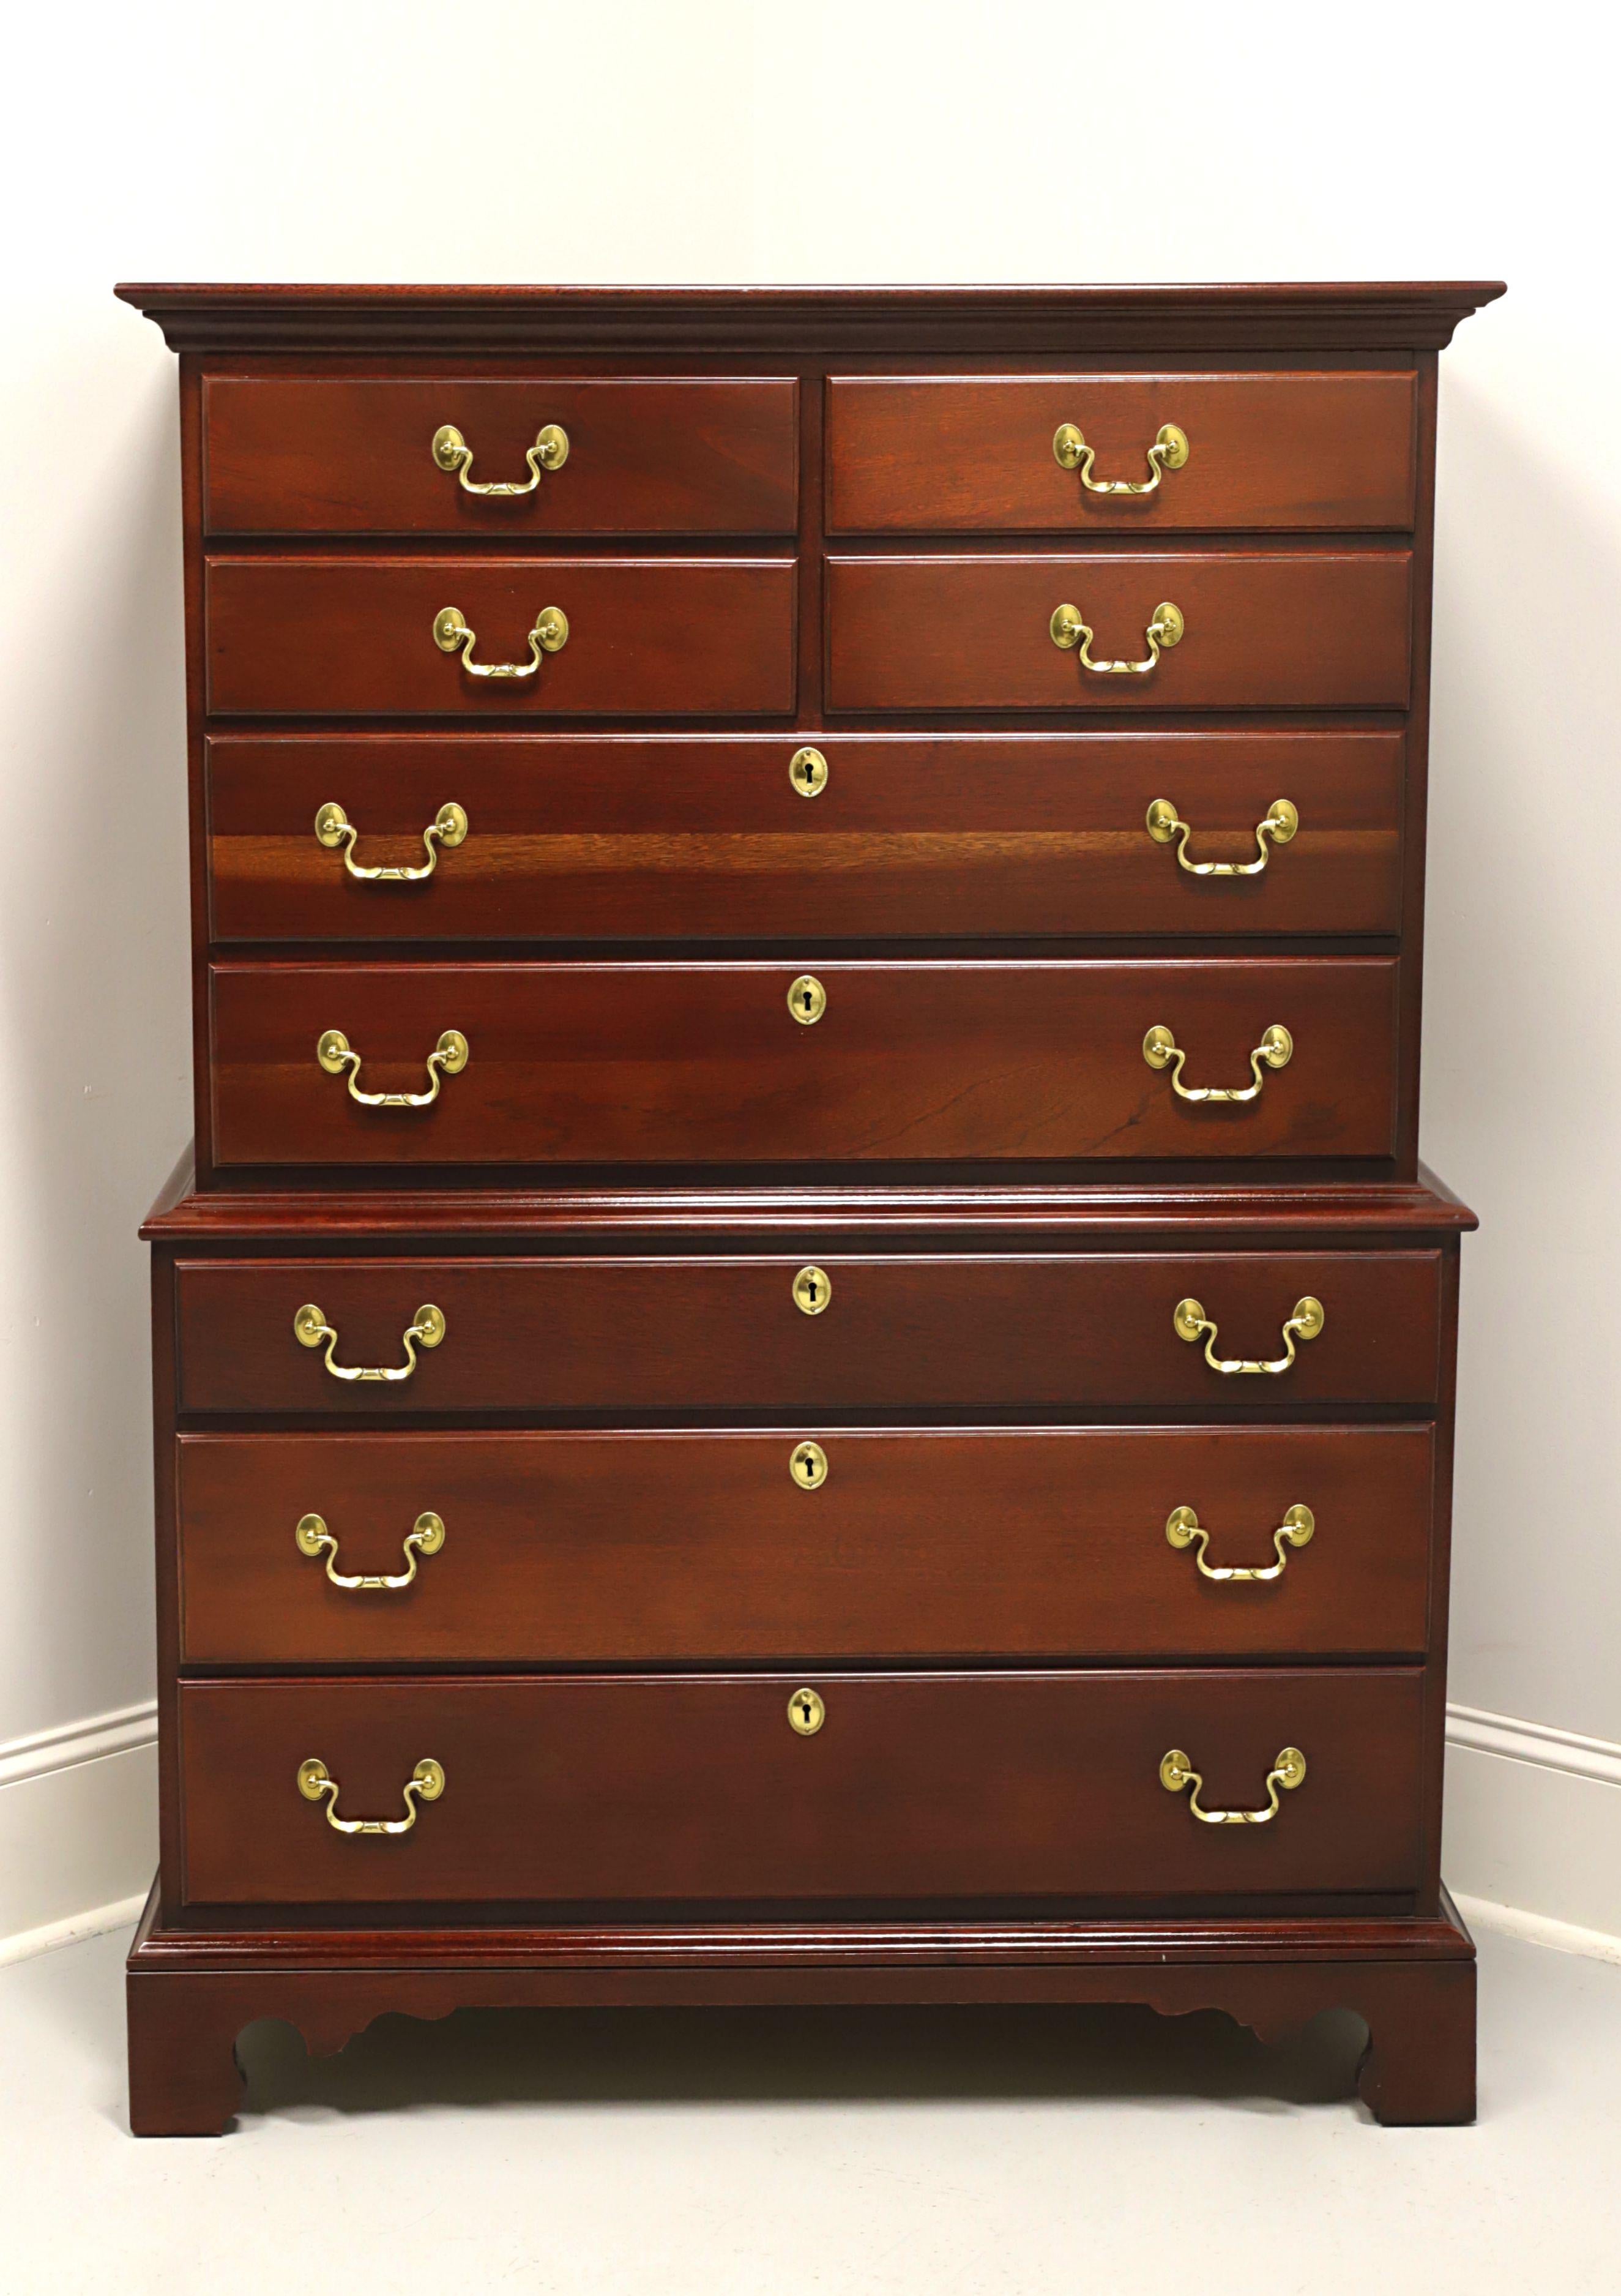 A Chippendale style chest on chest by Link-Taylor. Solid heirloom mahogany with brass hardware and bracket feet. Upper section has four smaller over two larger drawers. Lower section has three larger drawers. All drawers are of dovetail construction